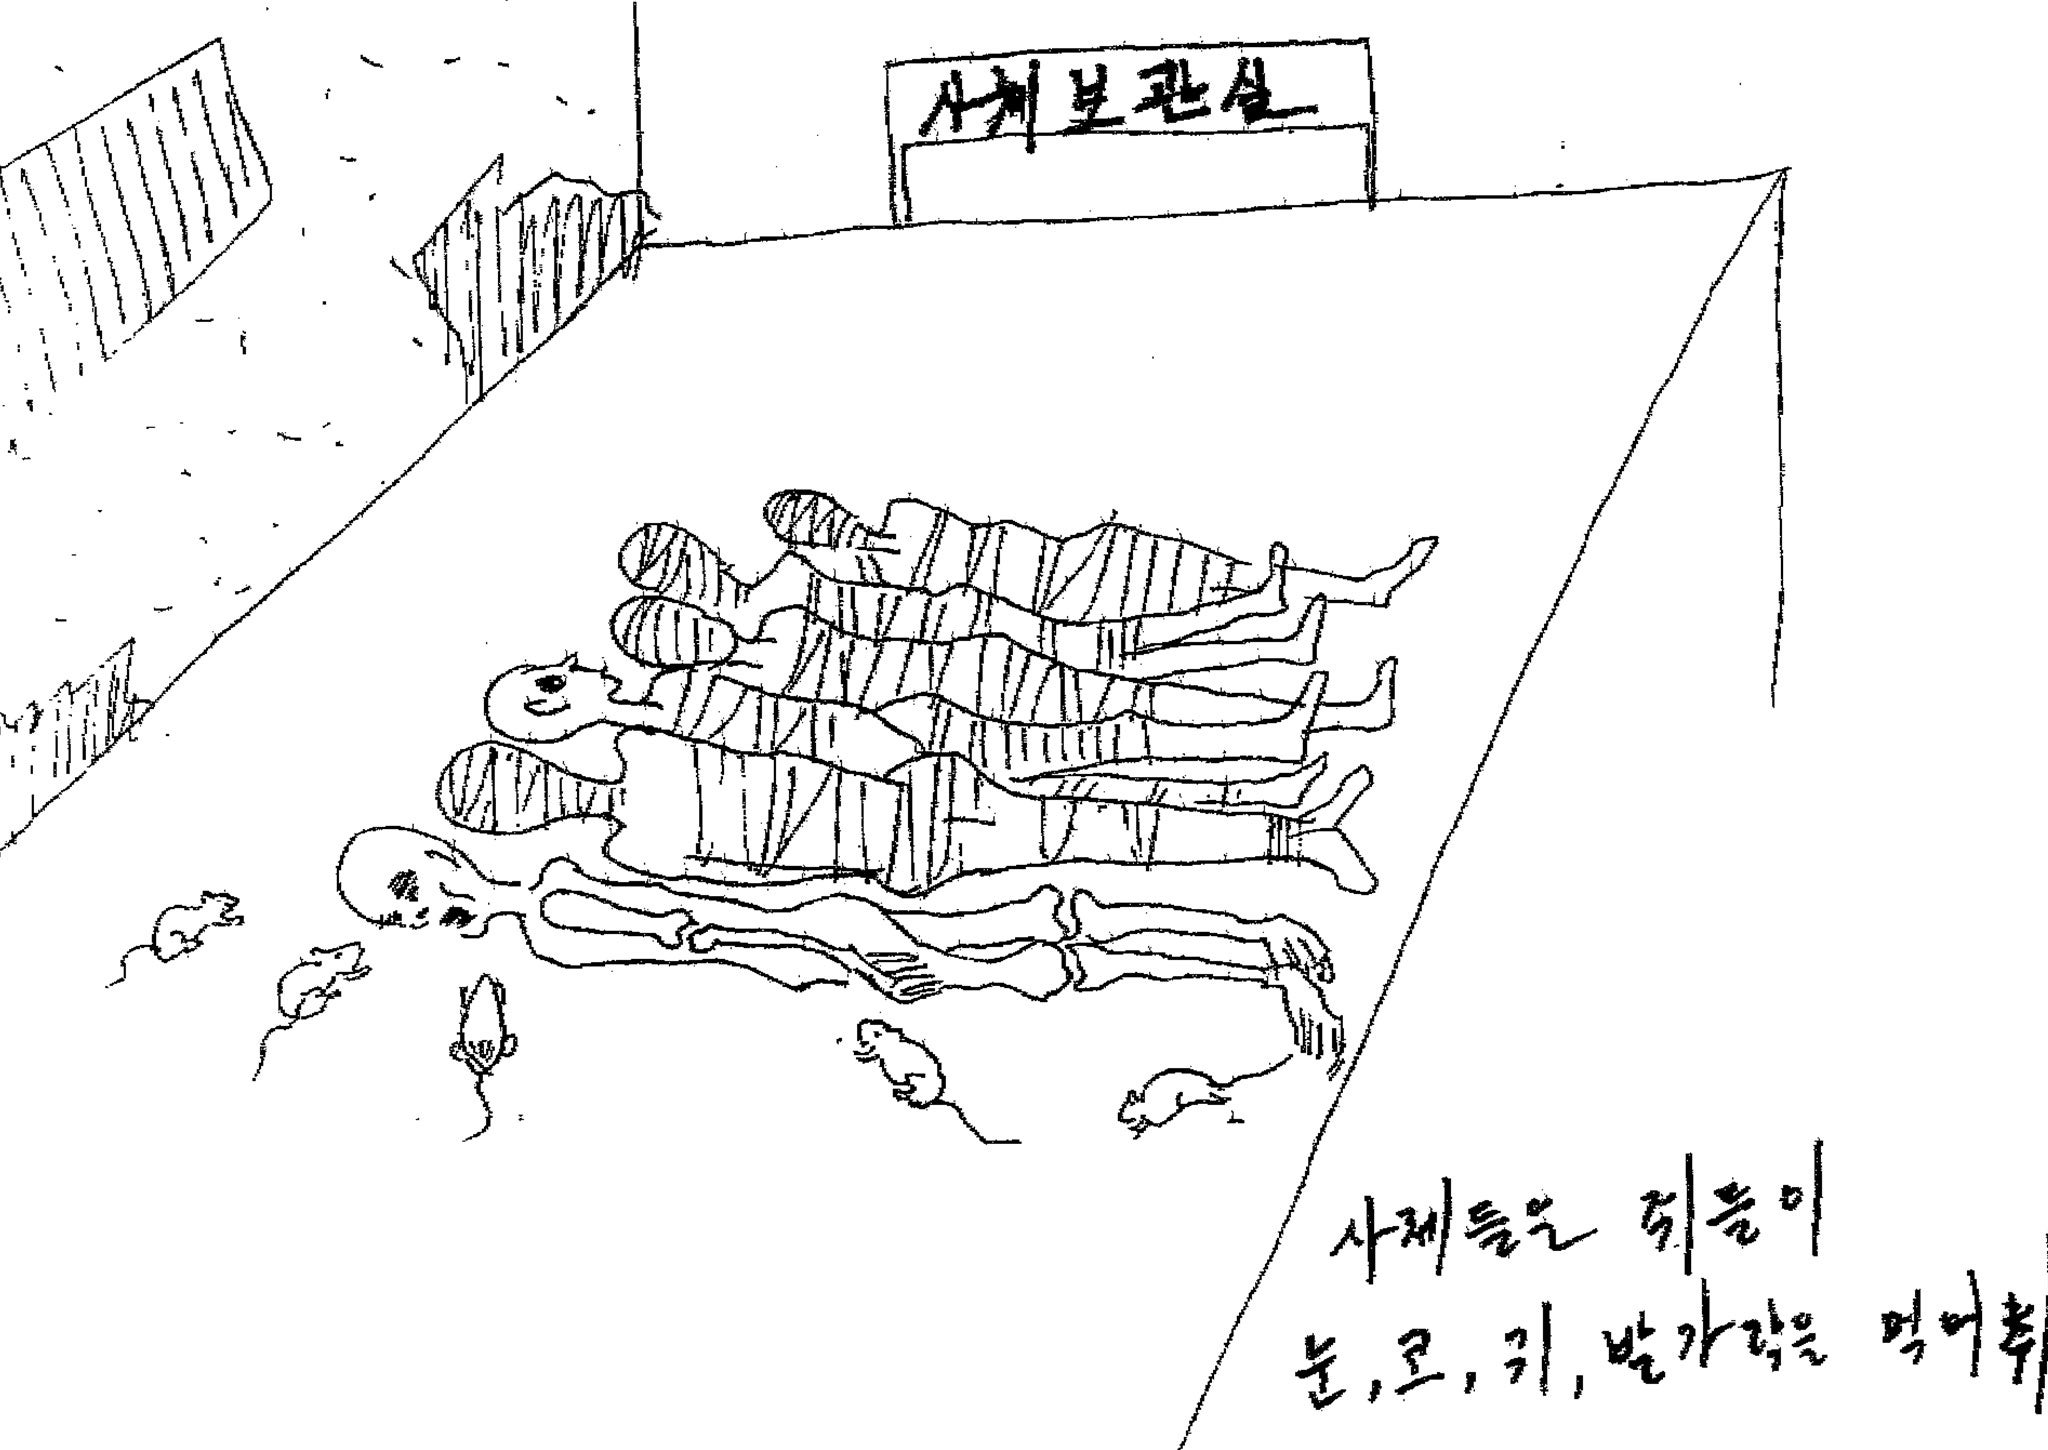 "Rats eat the corpses of dead starved prisoners, those who survive, eat the rats" A drawing by a former prisoner of the North Korean regime